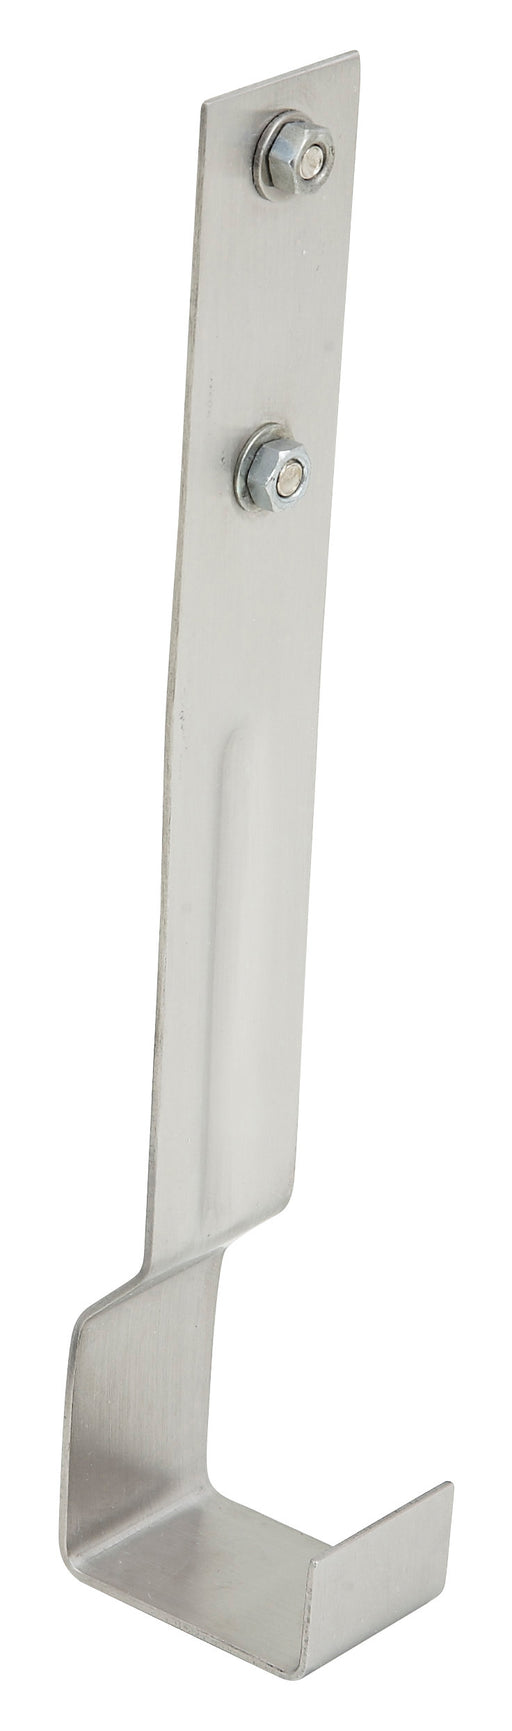 Mounting Strap for SPR-series Speed Rails (12 Each)-cityfoodequipment.com